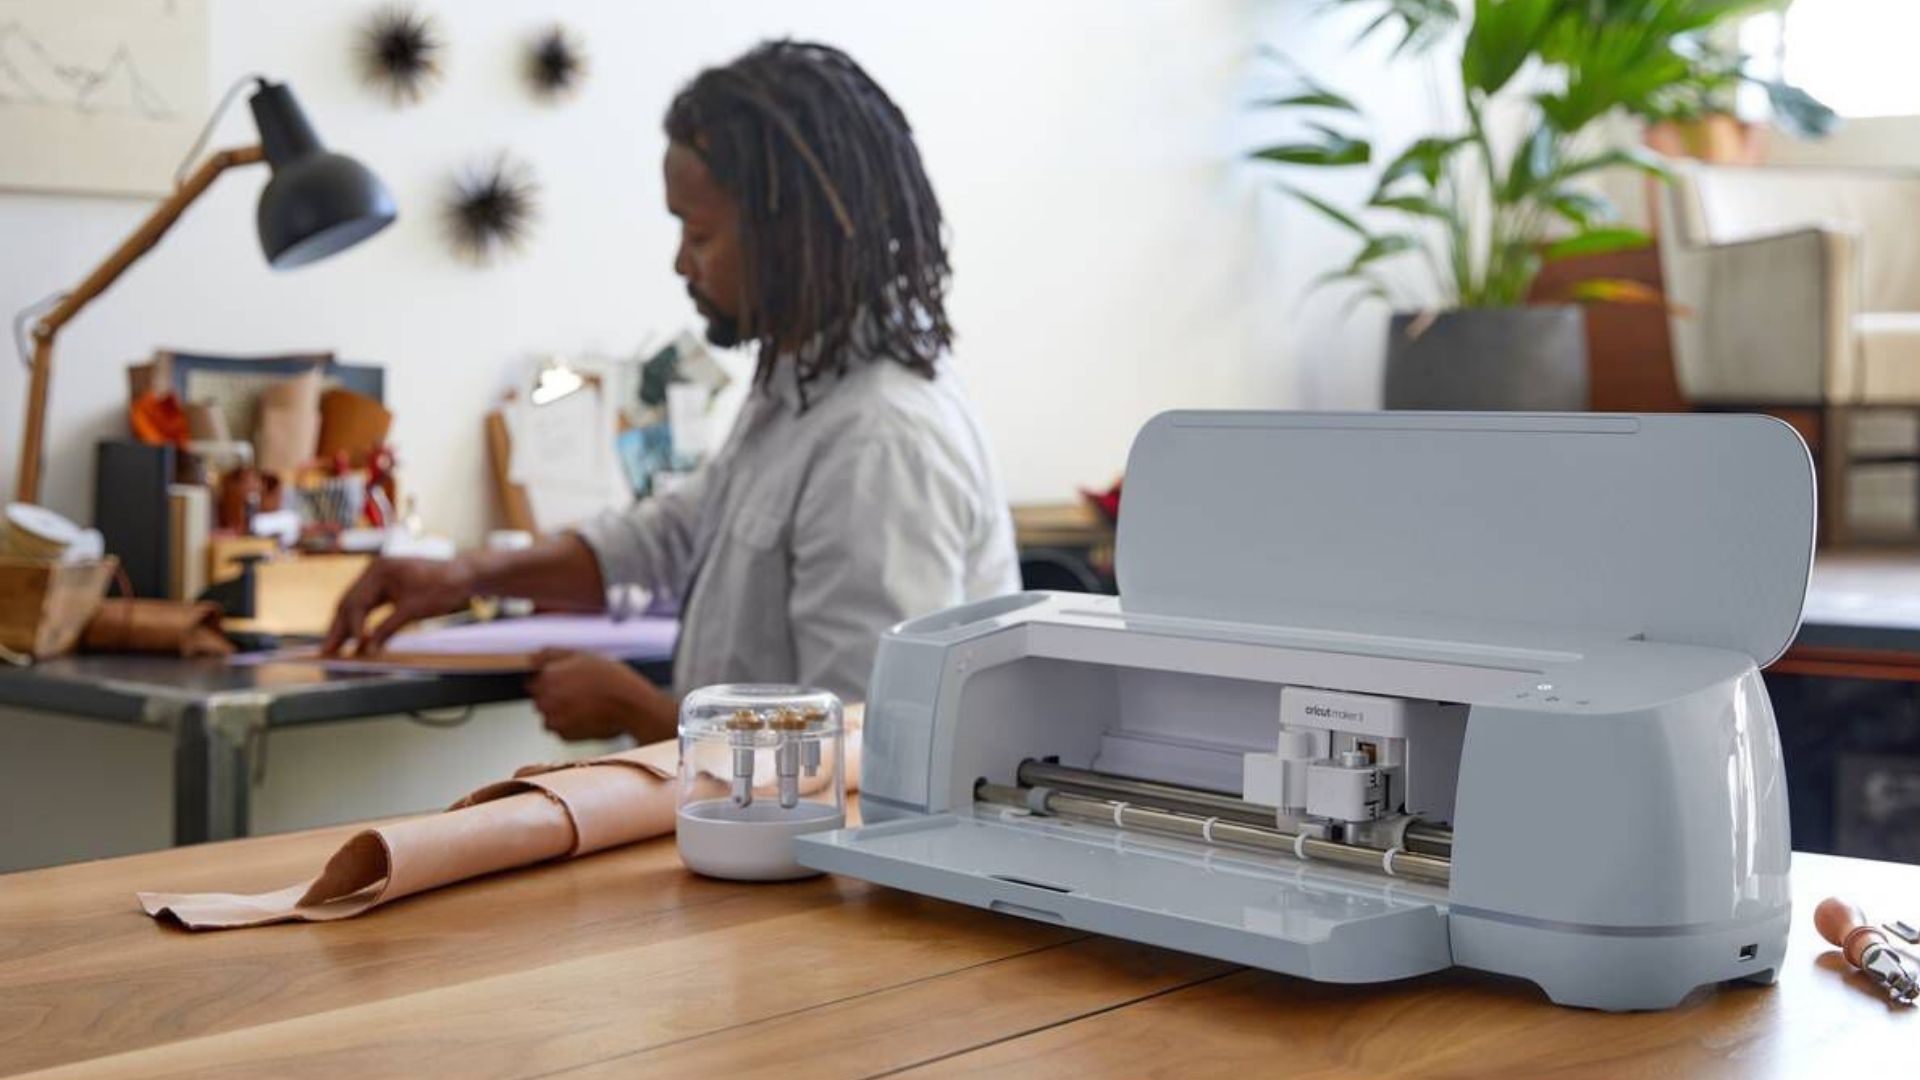 Buy Cricut Maker Products Online at Best Prices in Kenya